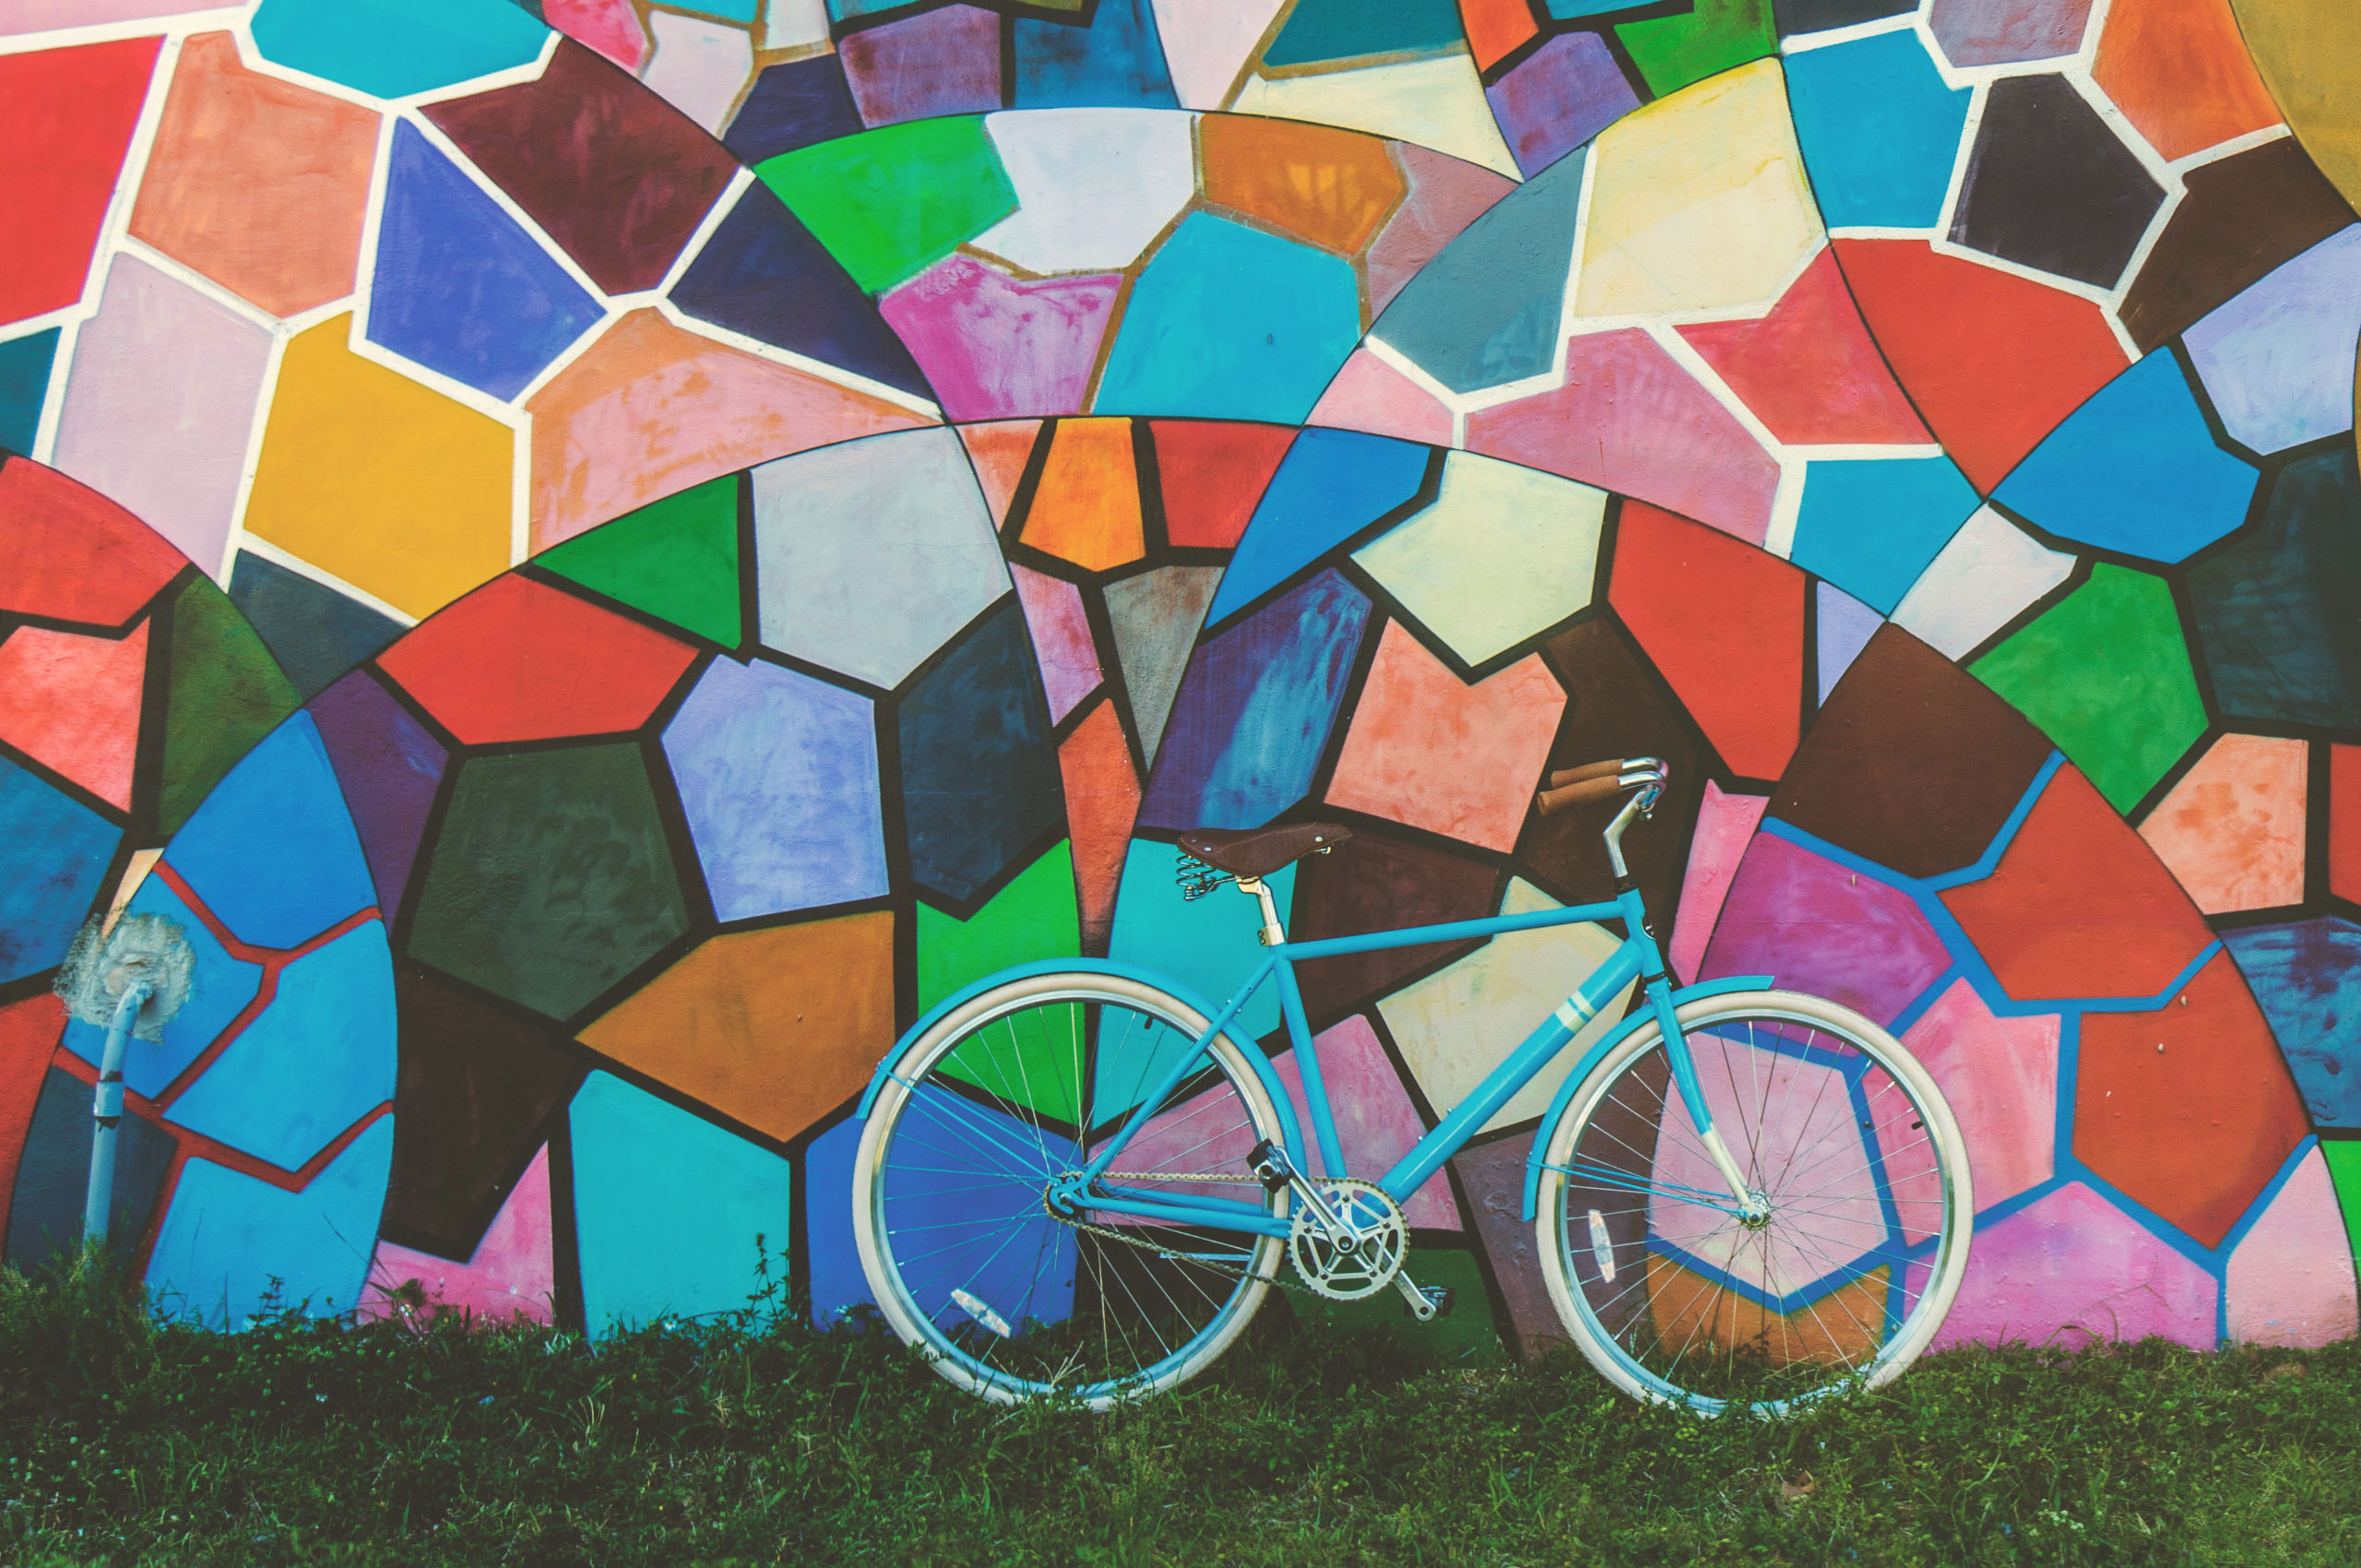 Blue bicycle on grass leaning against a colourful mural wall in a mosaic design